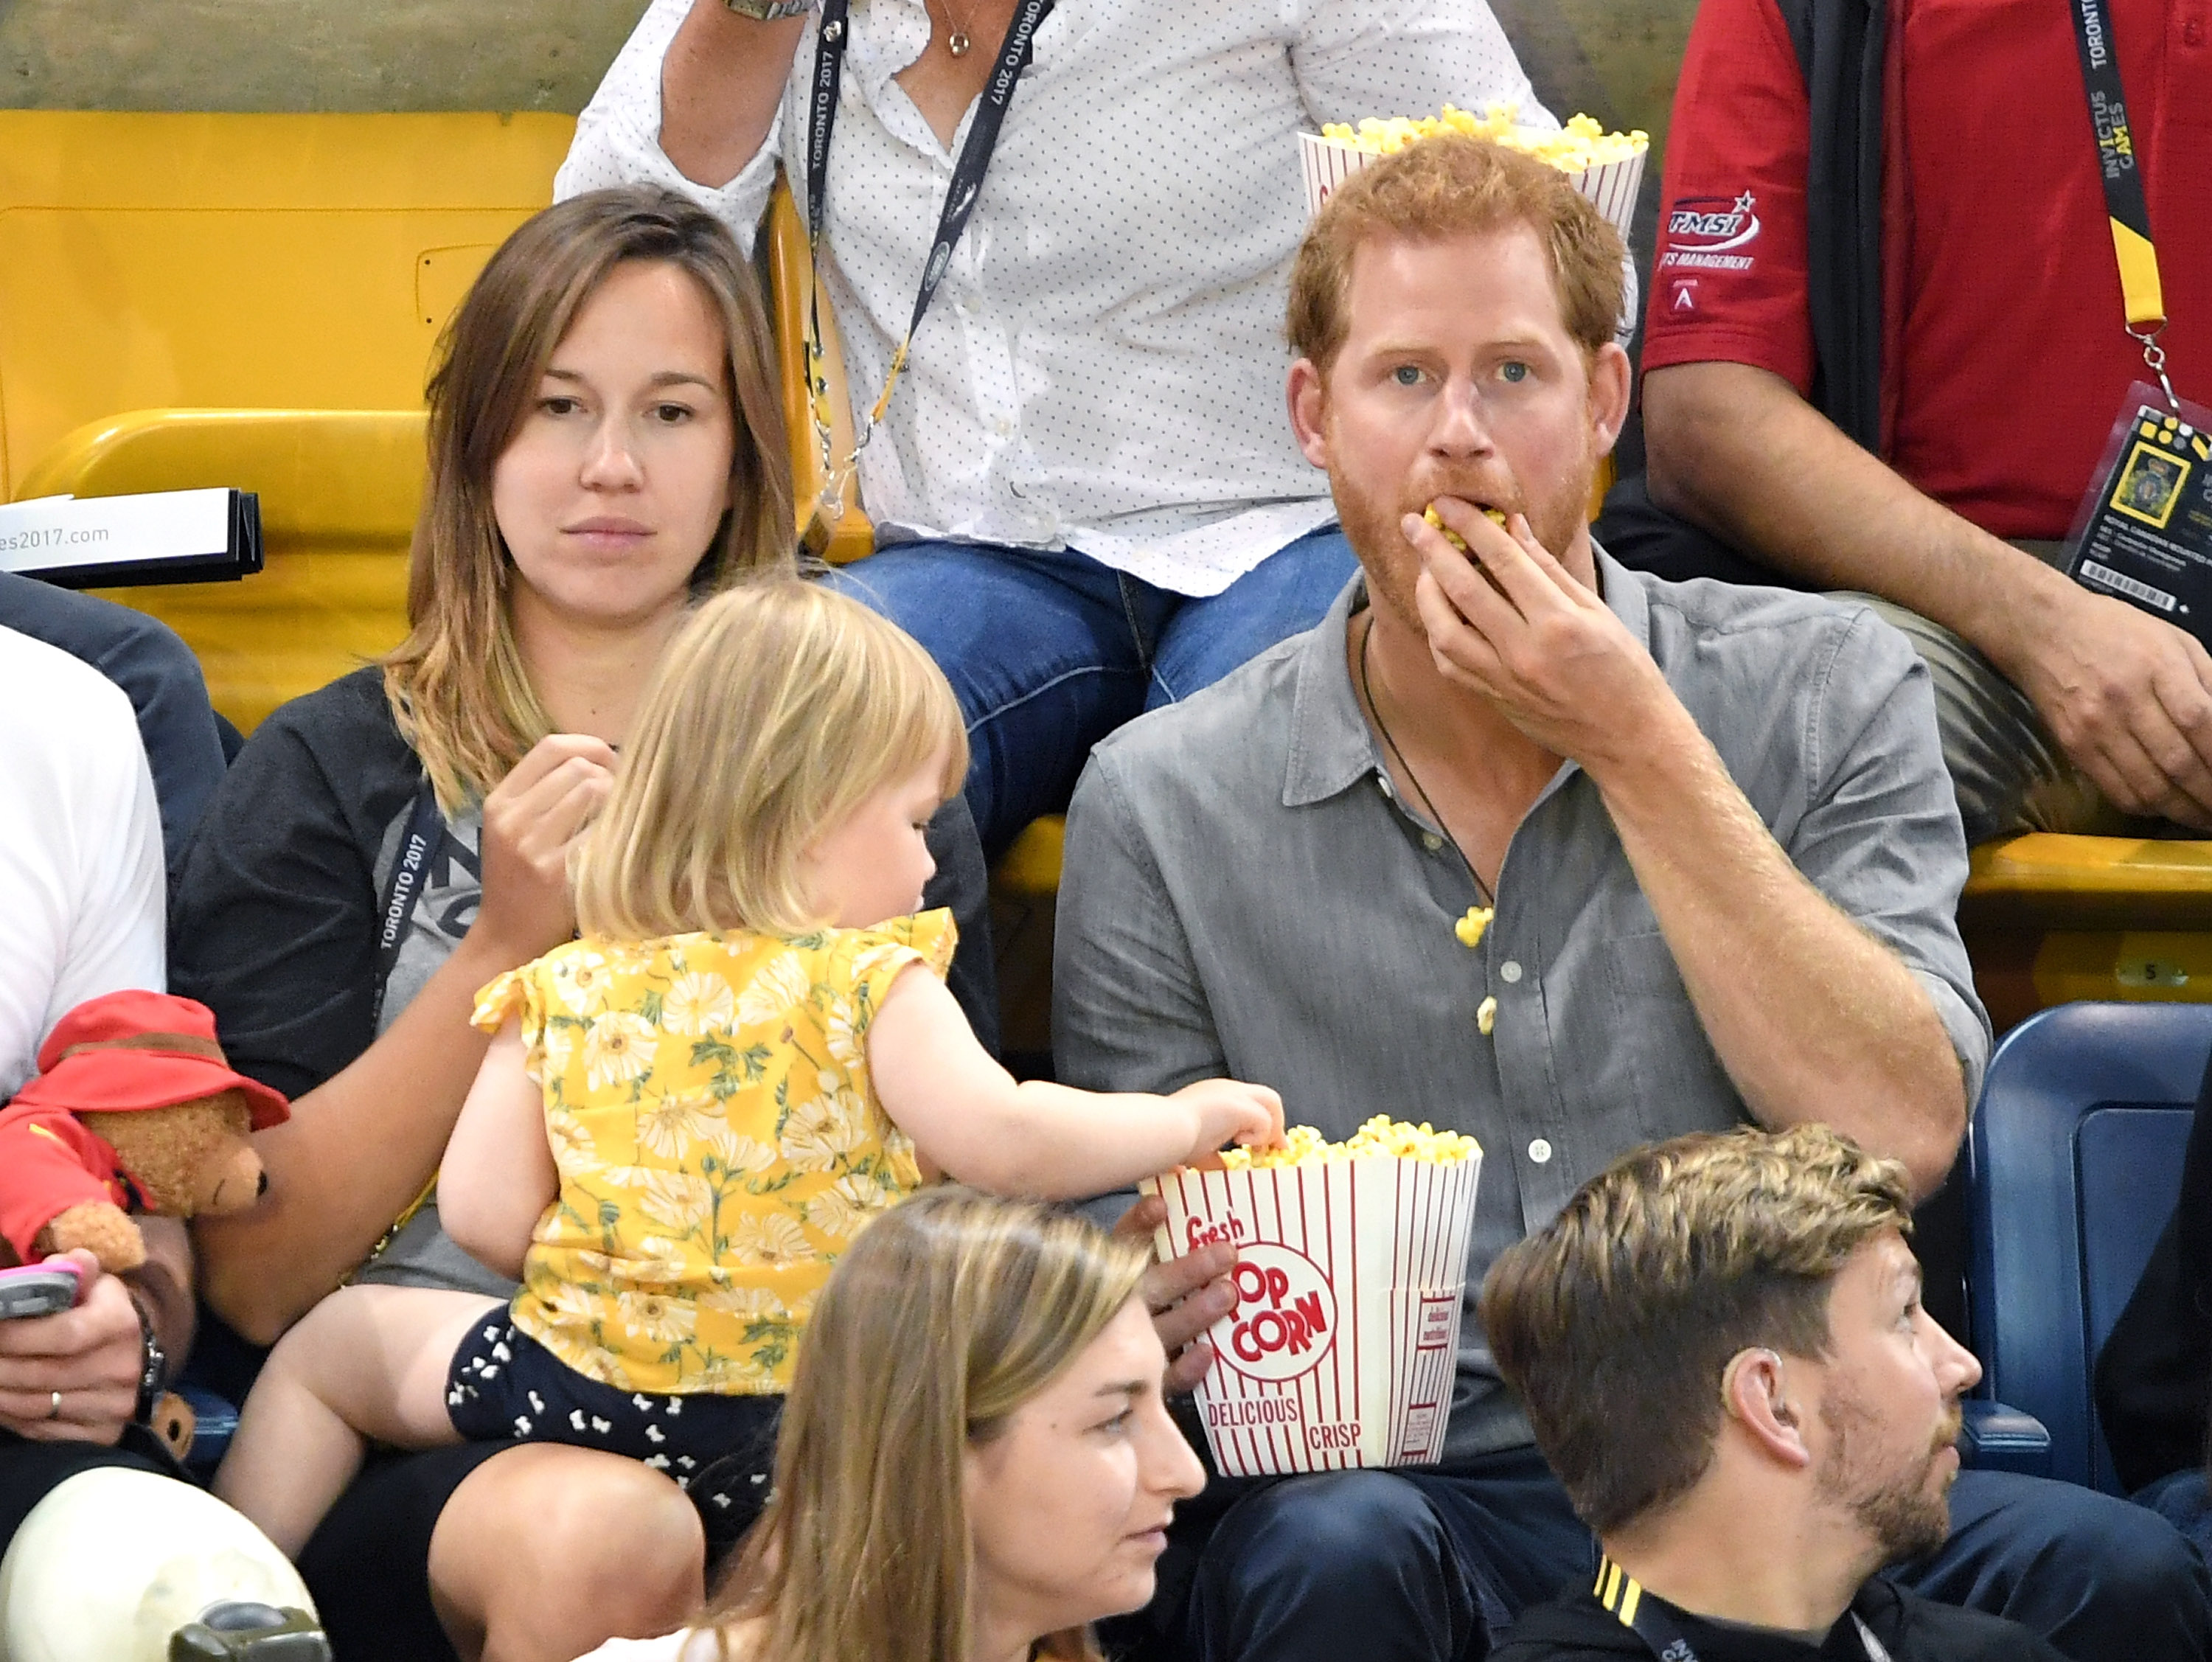 TORONTO, ON - SEPTEMBER 27: Prince Harry with Hayley Henson, wife of British Paralympian Dave Henson and their two-year-old daughter Emily attend the Seated Volleyball on day 5 of the Invictus Games Toronto 2017 at Mattamy Athletic Centre on September 27, 2017 in Toronto, Canada. The Games use the power of sport to inspire recovery, support rehabilitation and generate a wider understanding and respect for the Armed Forces. (Photo by Karwai Tang/WireImage)